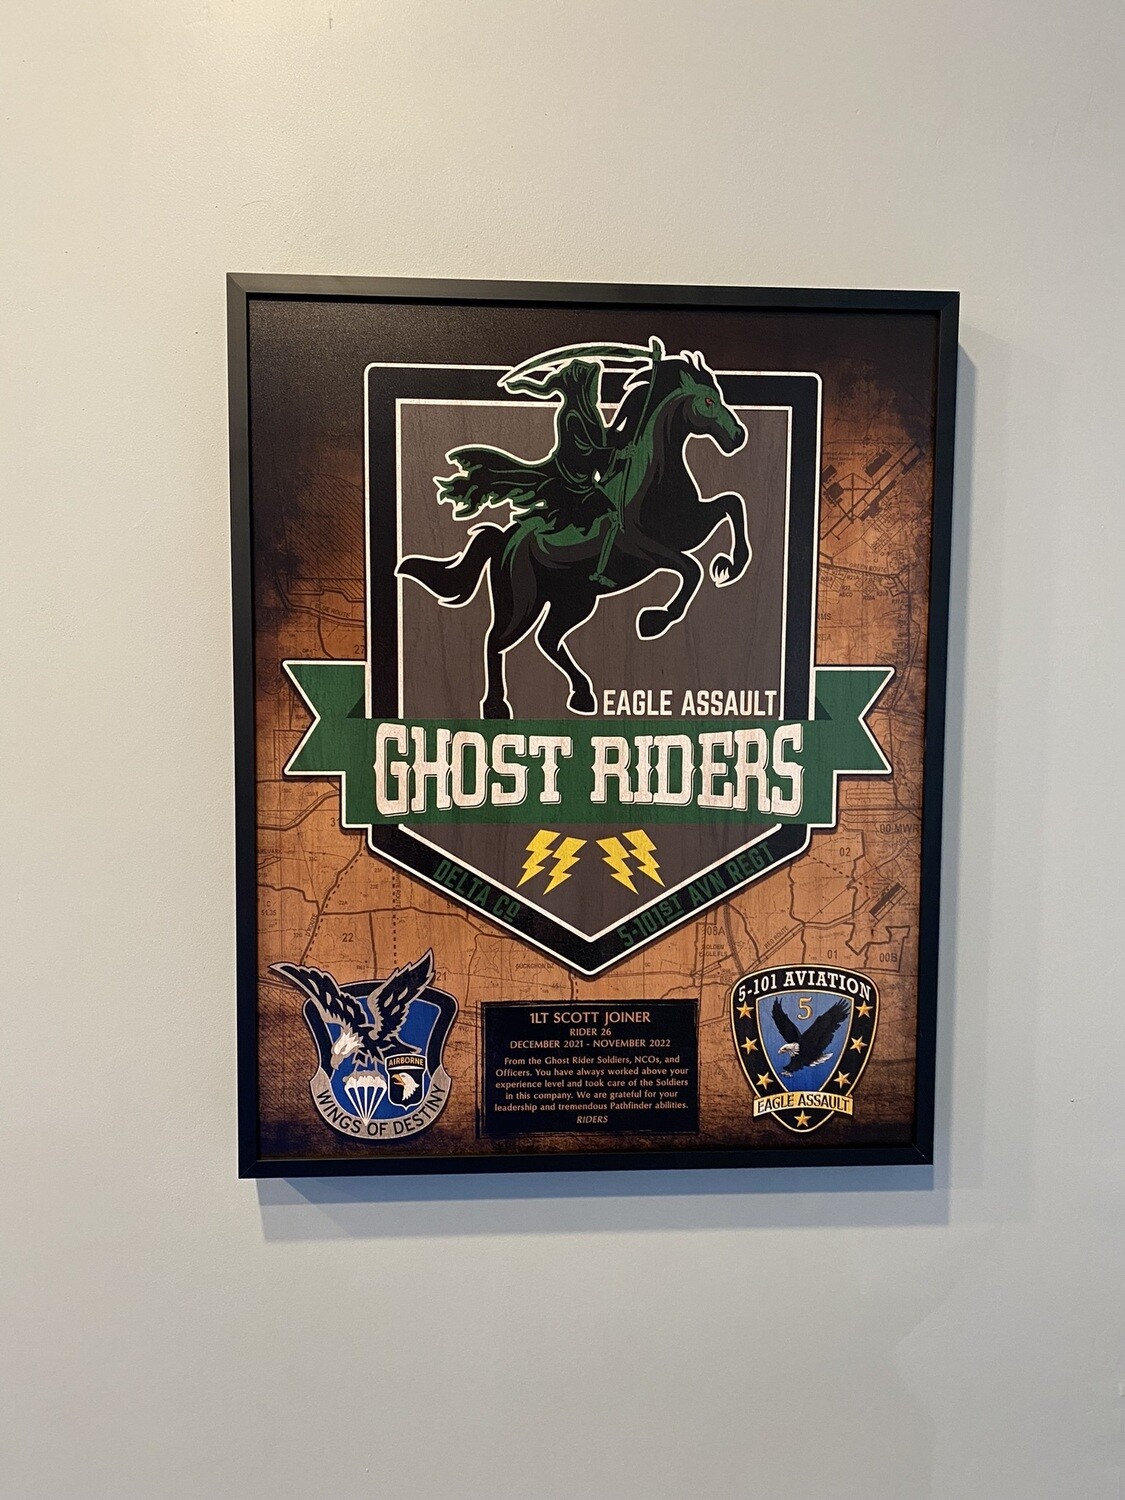 D Co "Ghost Riders" 5-101 AVN REGT Wood Plaque- 16.5"x20.5"